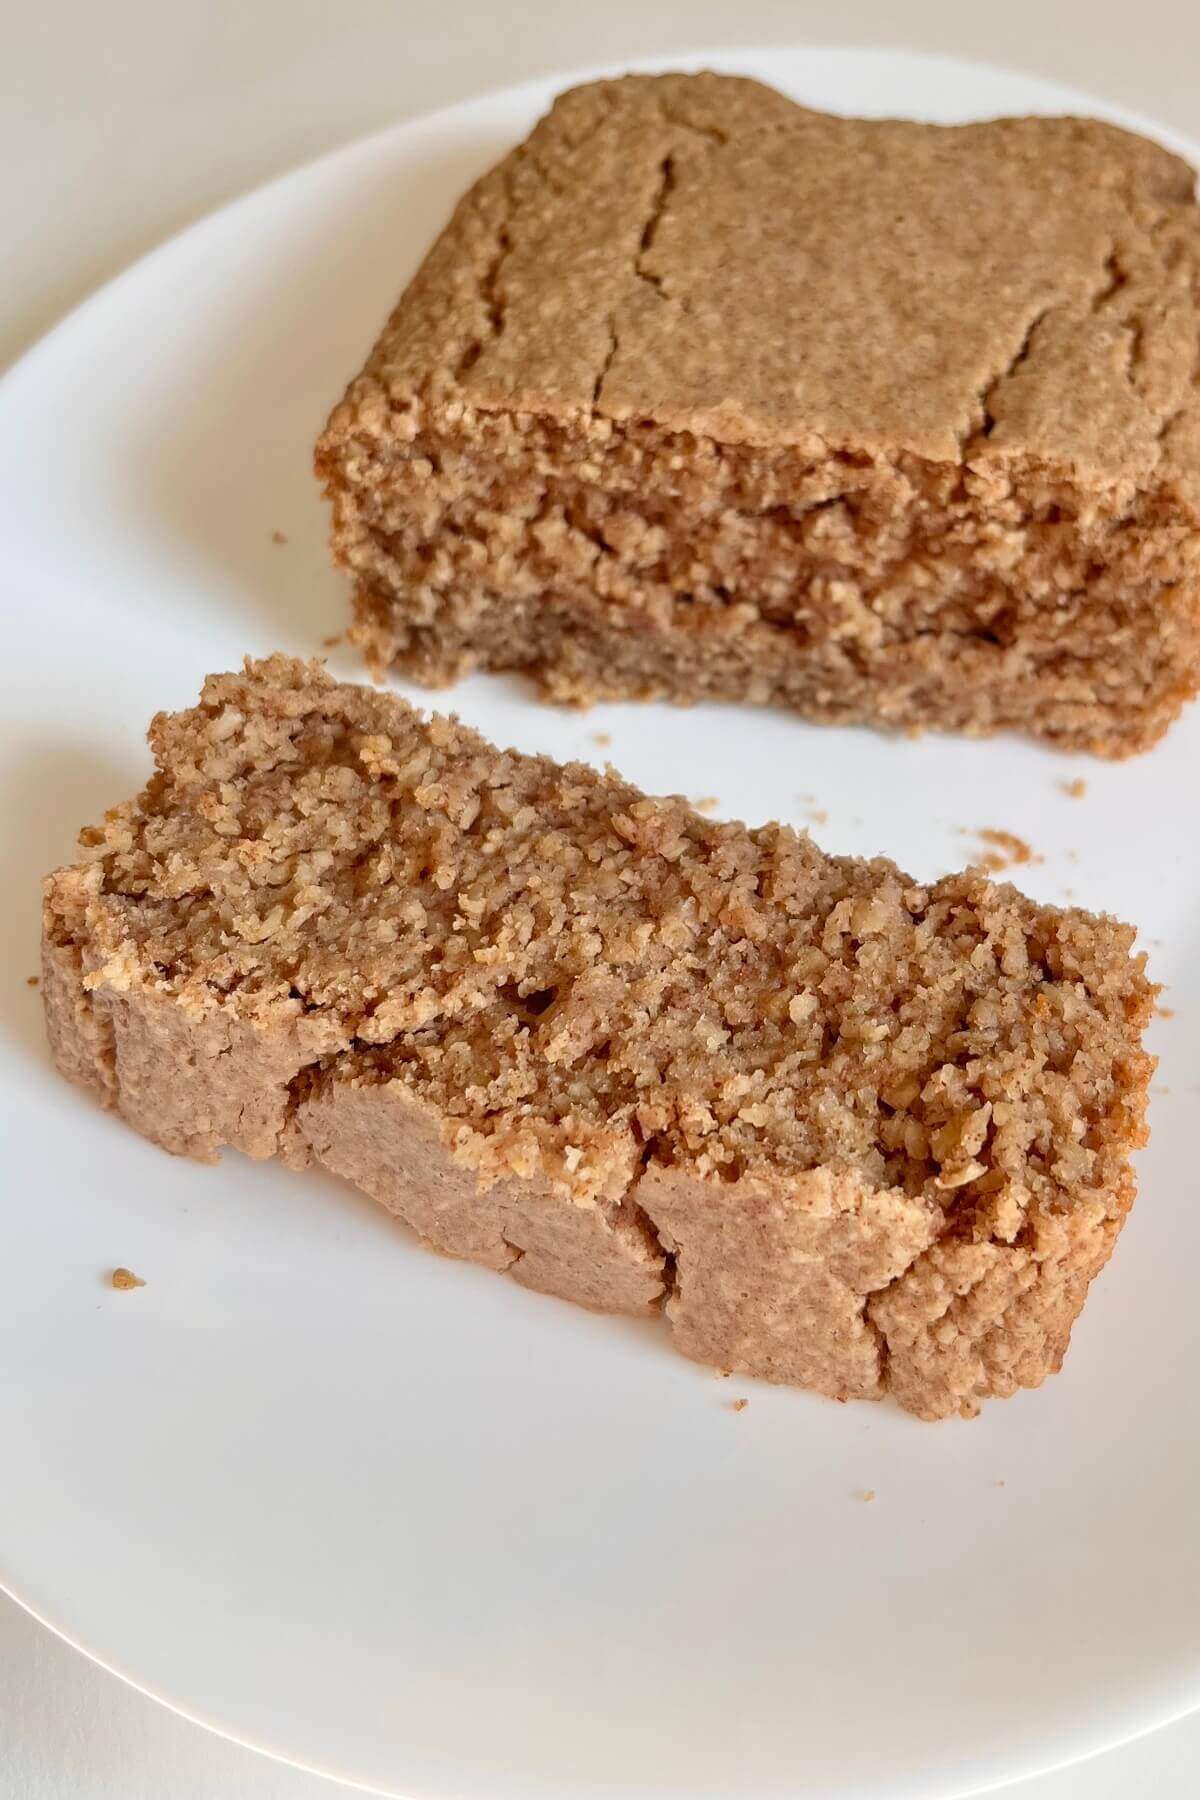 A slice of gluten-free oat cake next to the rest of the loaf.